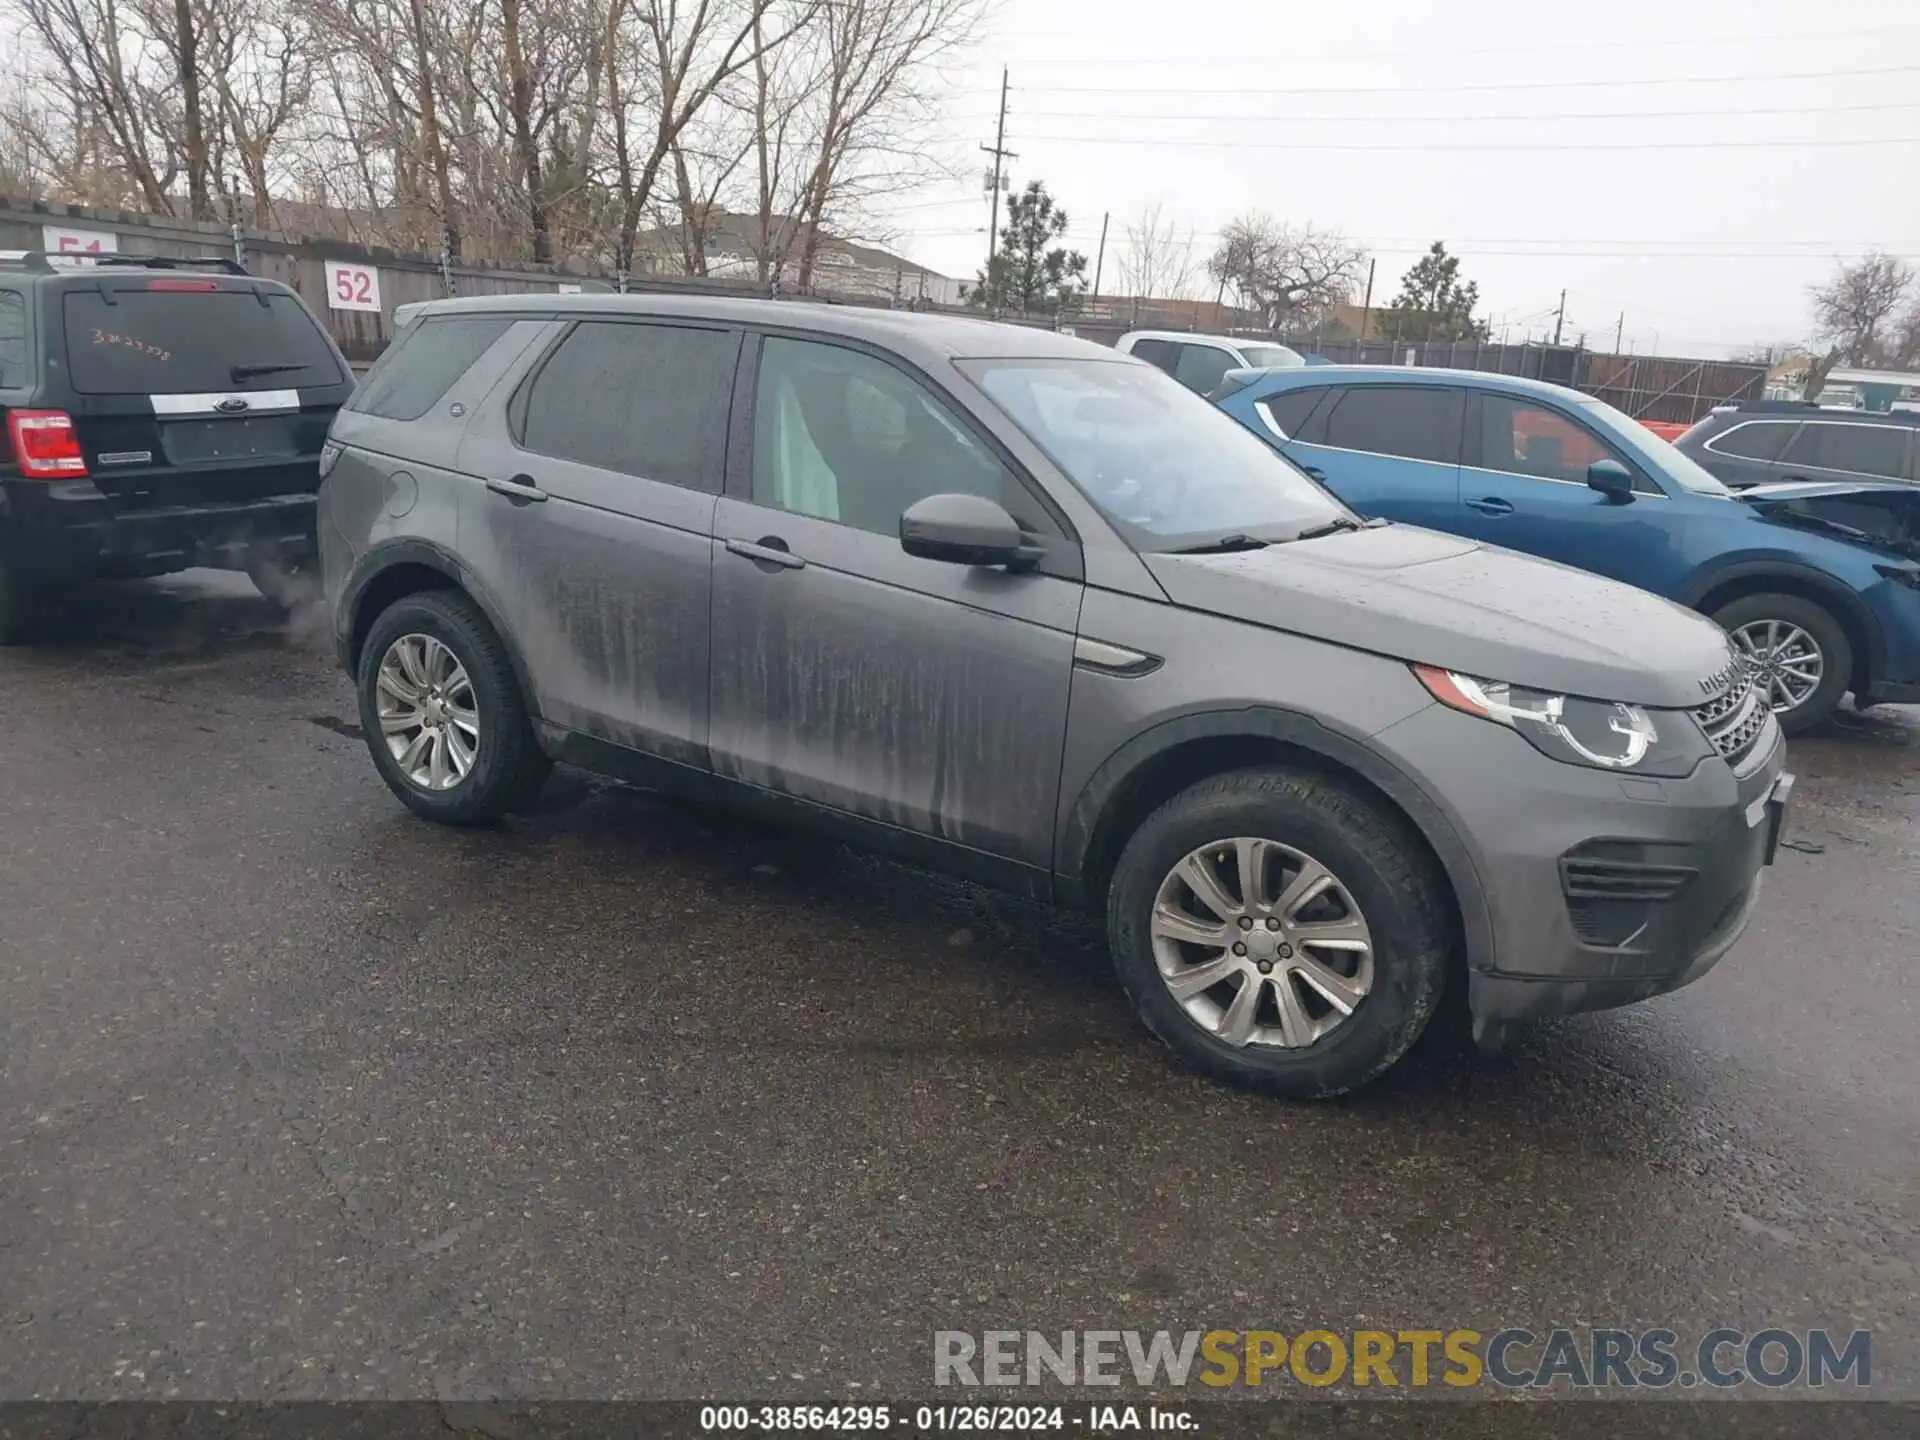 1 Photograph of a damaged car SALCP2FX3KH783286 LAND ROVER DISCOVERY SPORT 2019